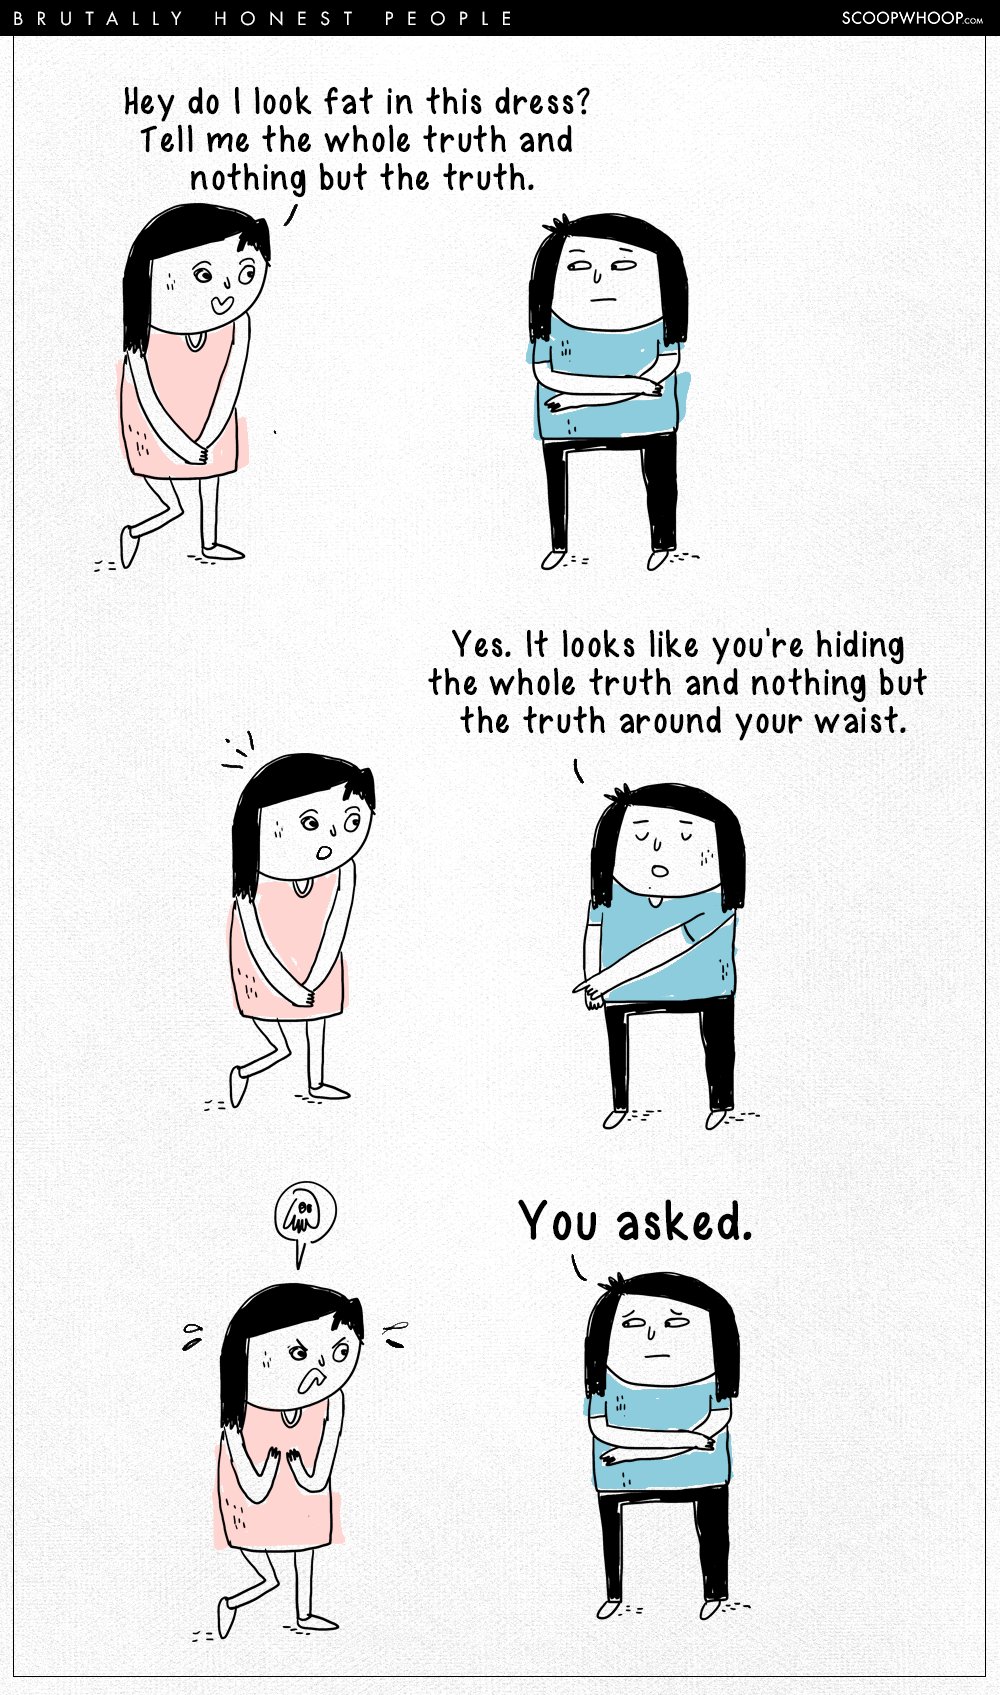 15 Hilarious Comics That Accurately Sum Up The Struggles Of A Brutally Honest Person